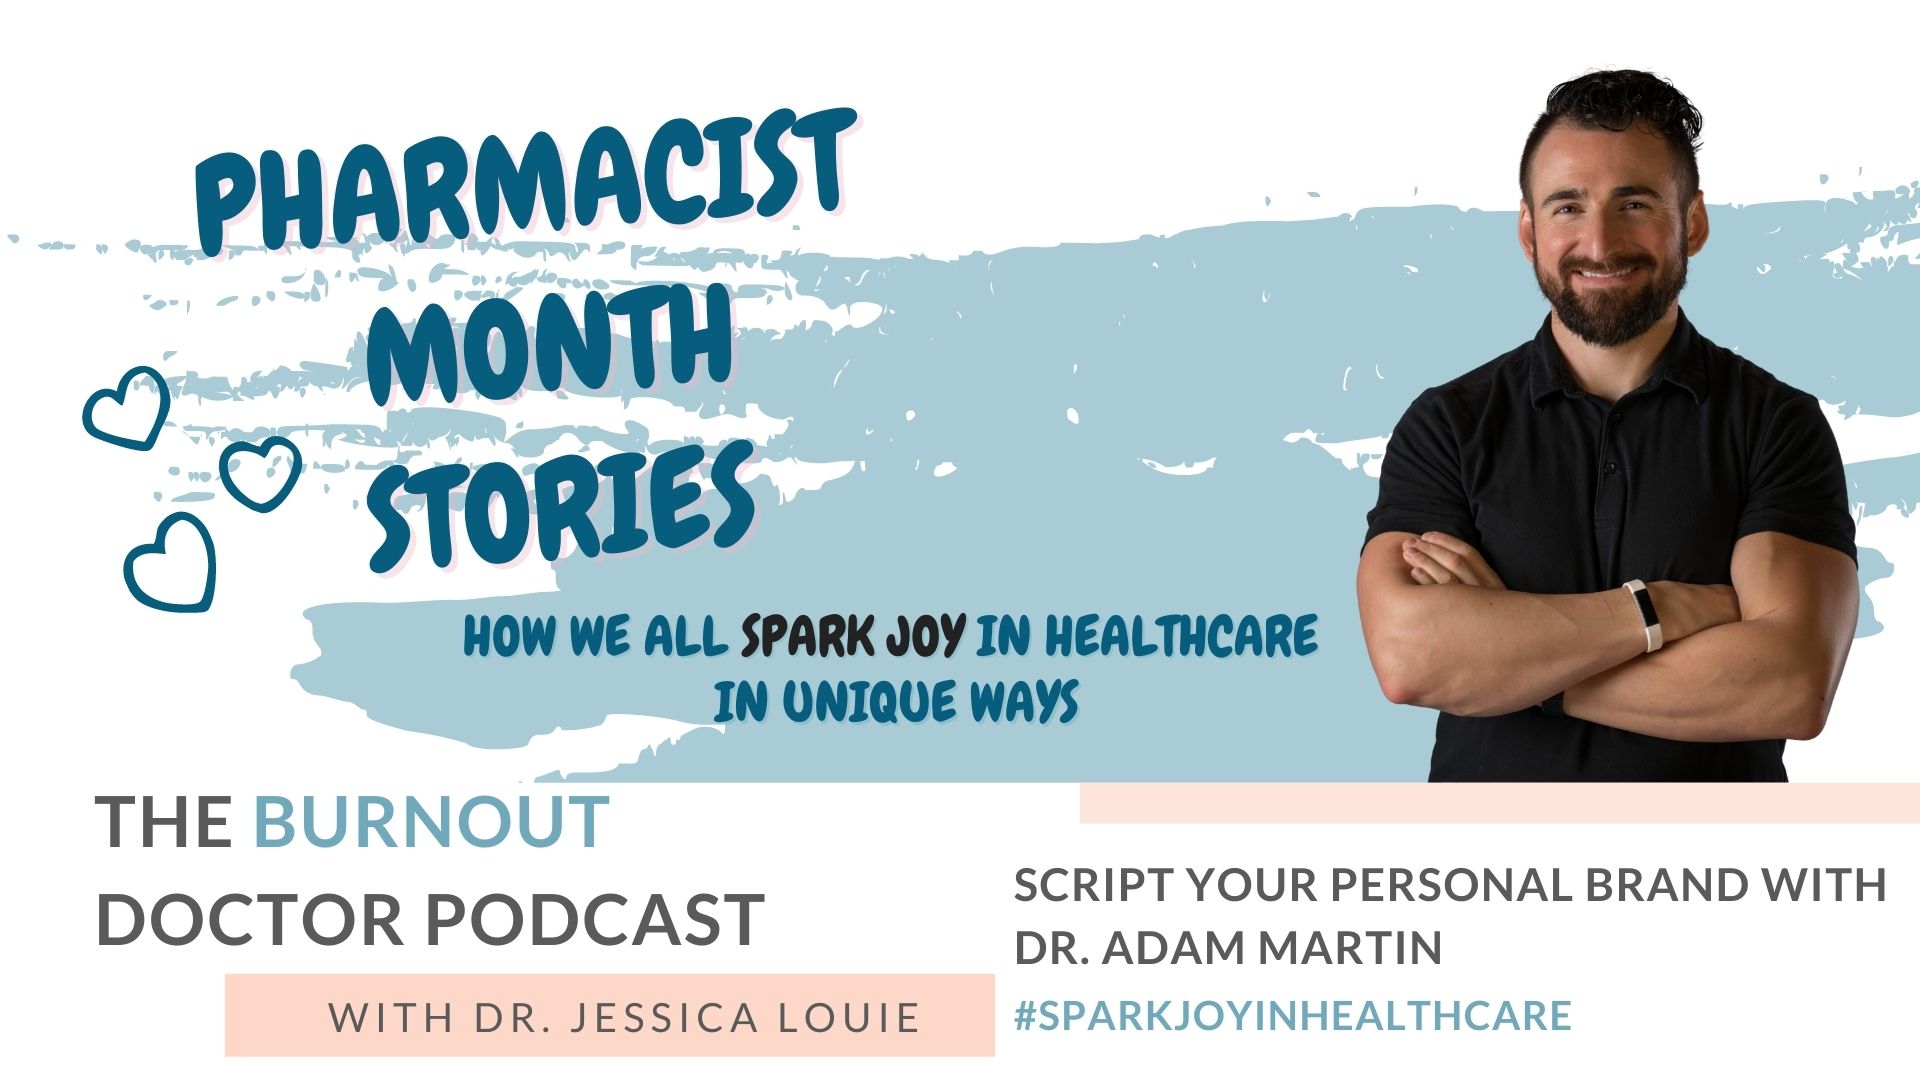 Dr. Adam Martin on The Burnout Doctor Podcast with Dr. Jessica Louie. Fit Pharmacist. Script your Personal Brand. Pharmacist burnout coaching. KonMari Method simplifying healthcare families. Joy at work.